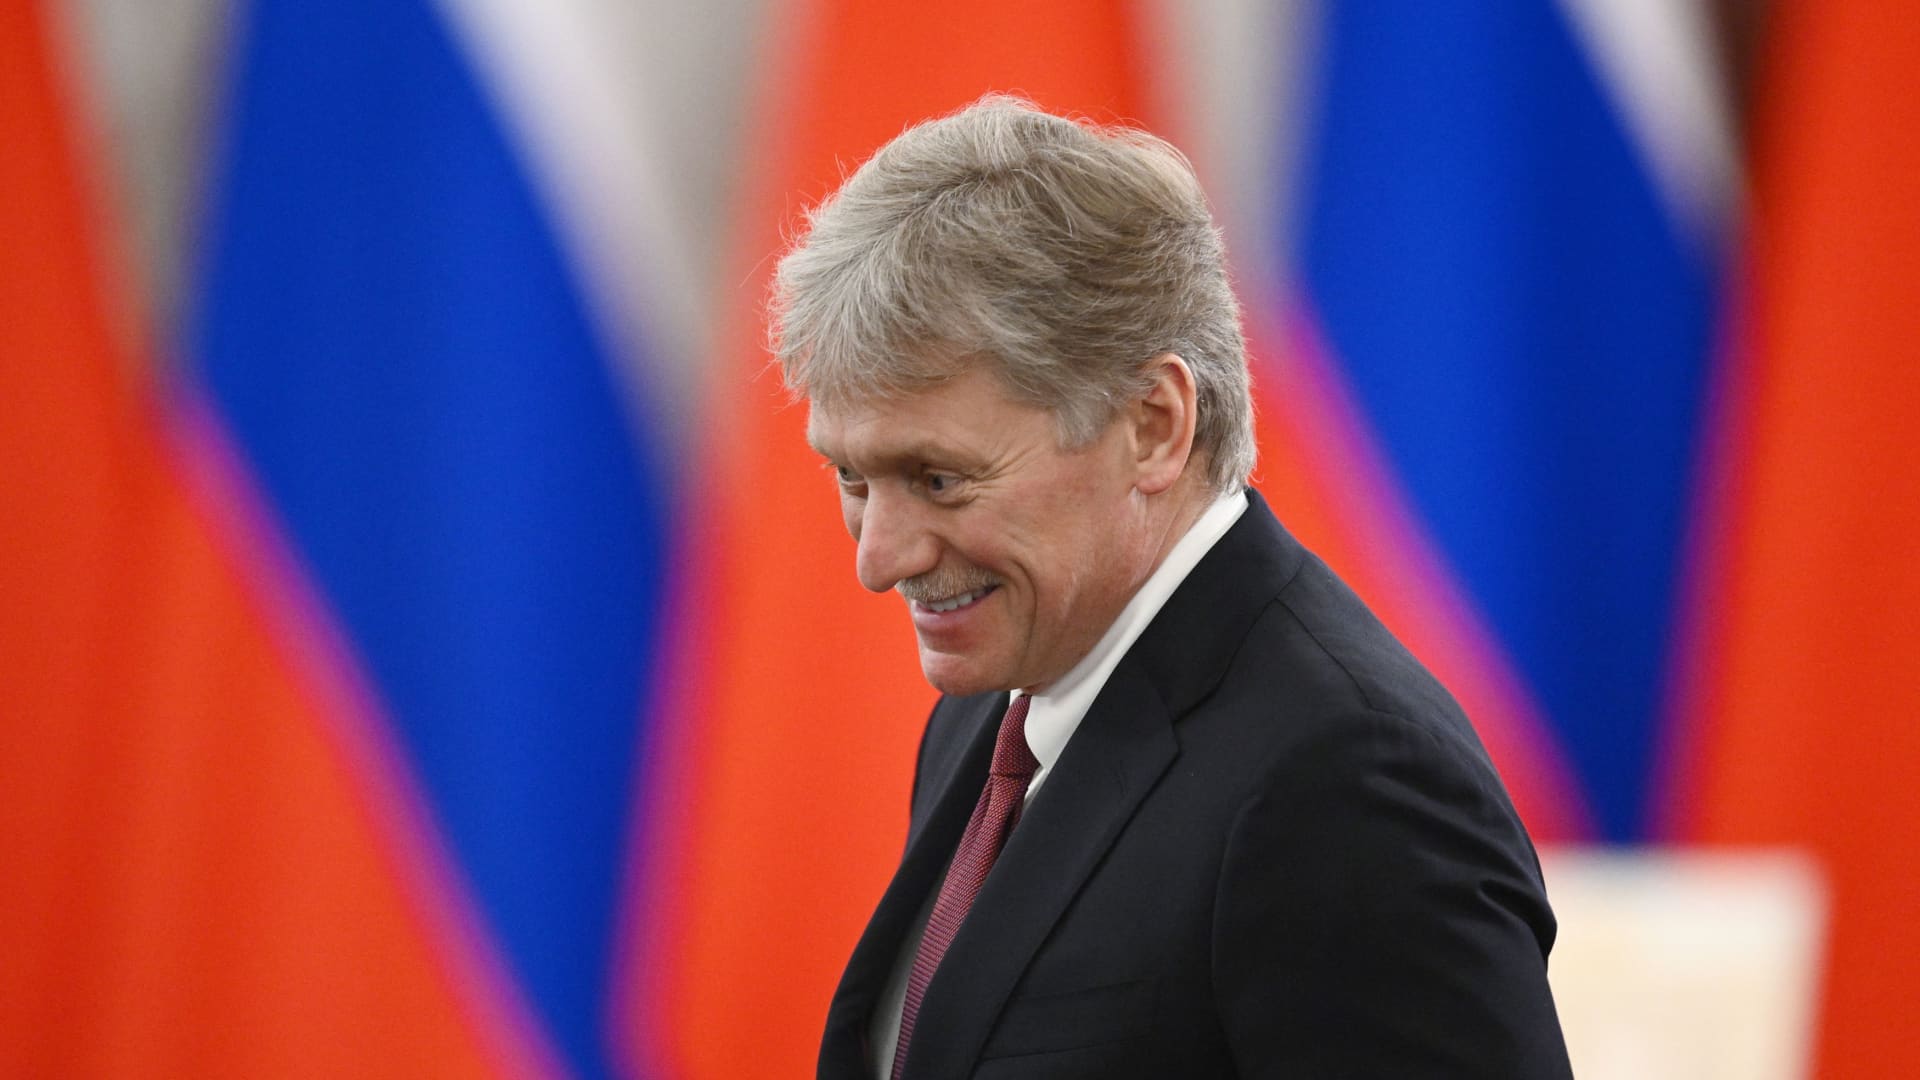 Kremlin spokesman Dmitry Peskov waits before a signing ceremony following talks of Russian President Vladimir Putin and Chinese President Xi Jinping at the Kremlin in Moscow, Russia, March 21, 2023.